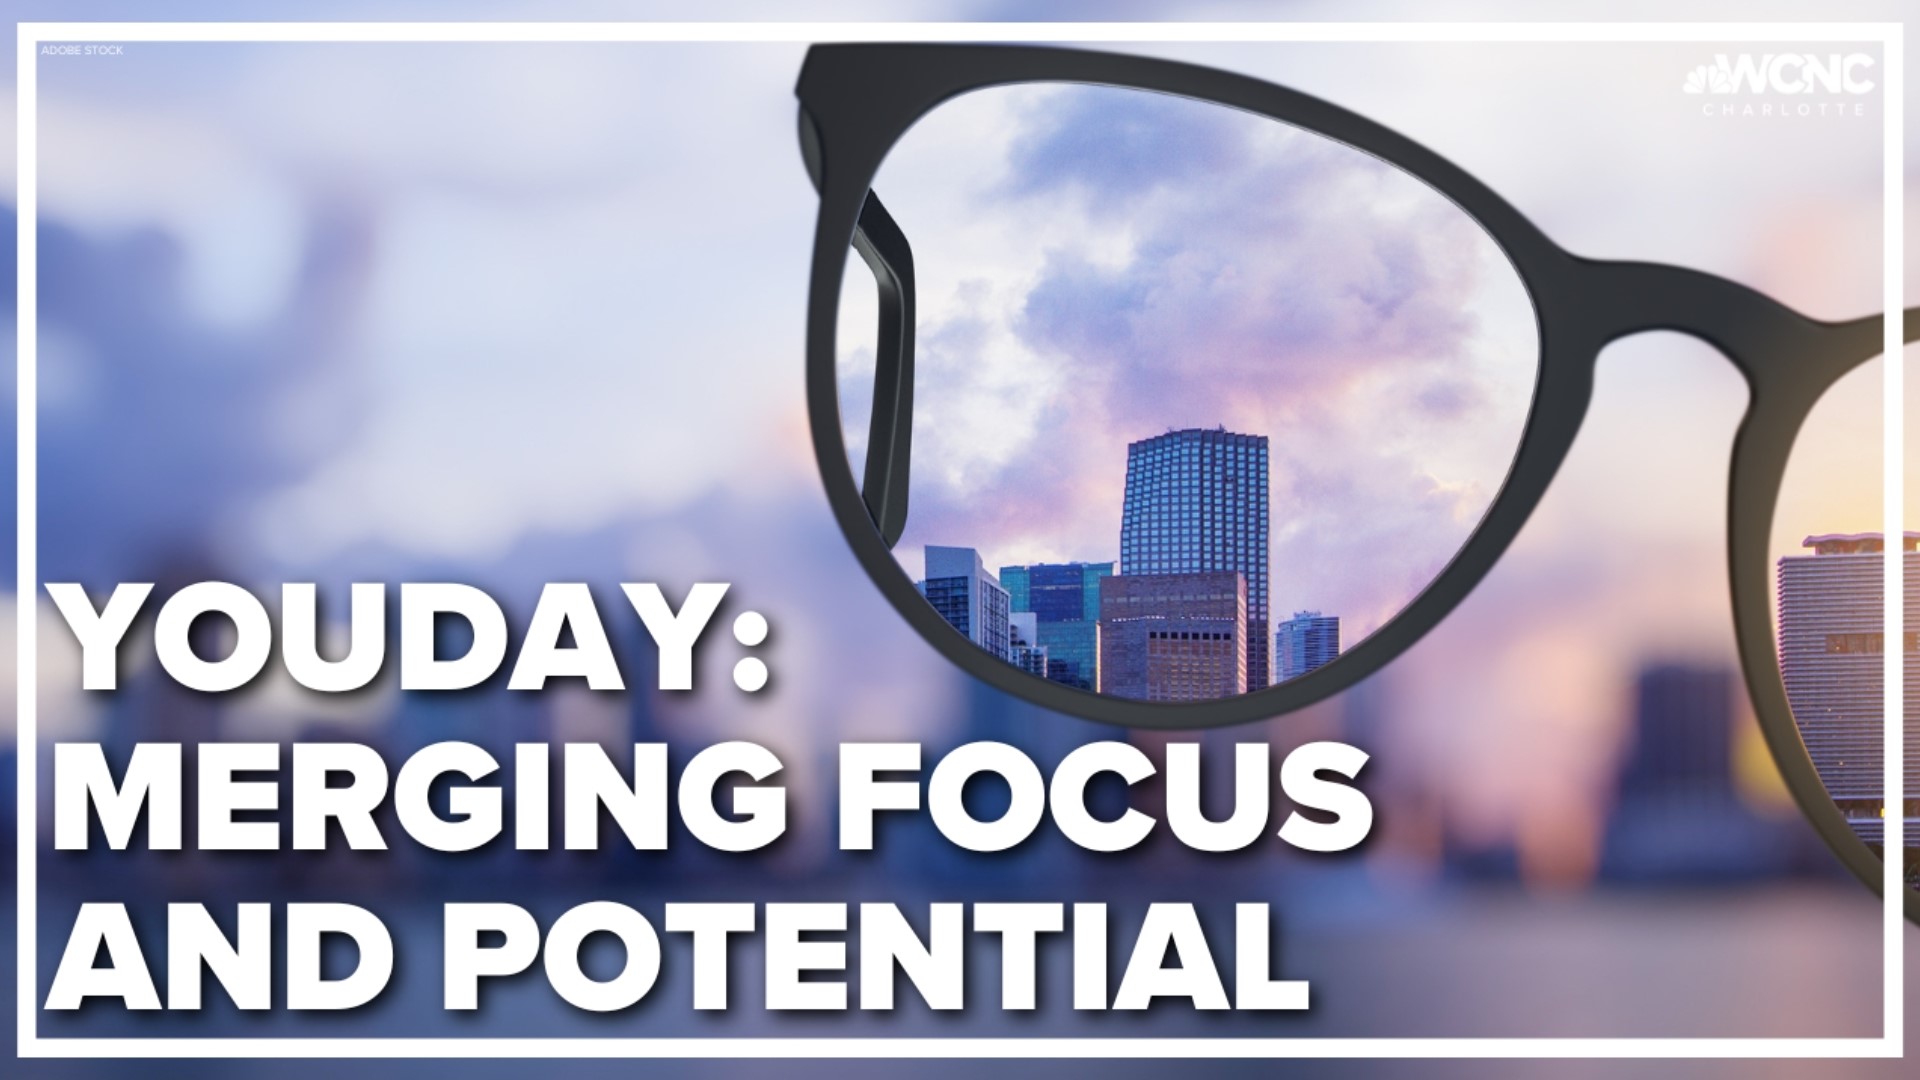 What do you get when you merge focus and potential? The answer, a powerful new beginning.